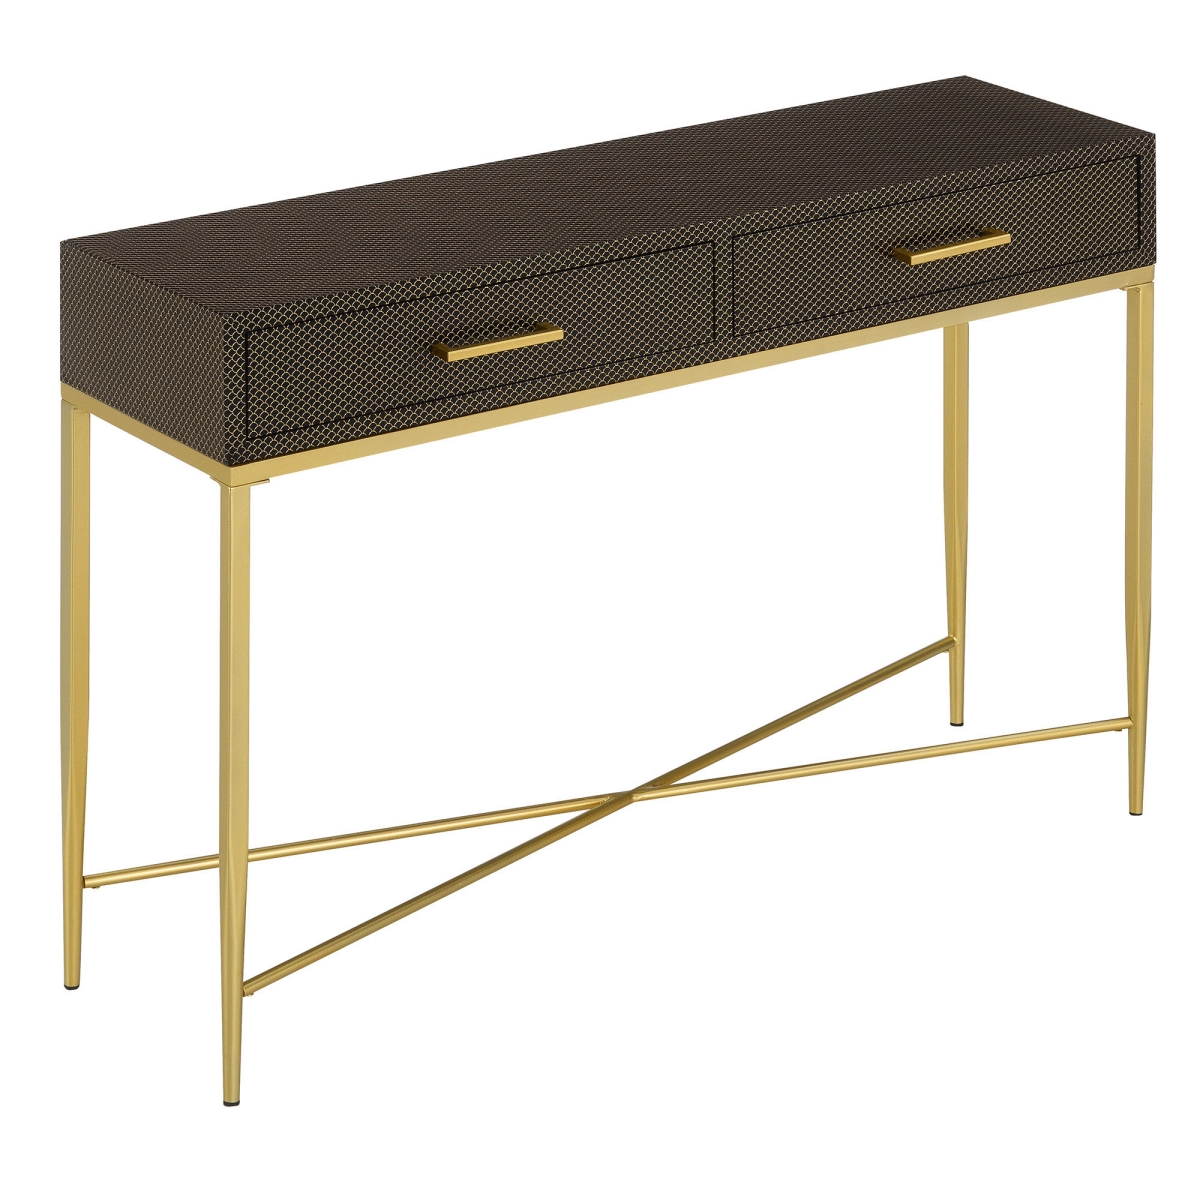 413189blsp 42 X 12 X 30 In. Ashley Console Table, Black Scallop & Gold